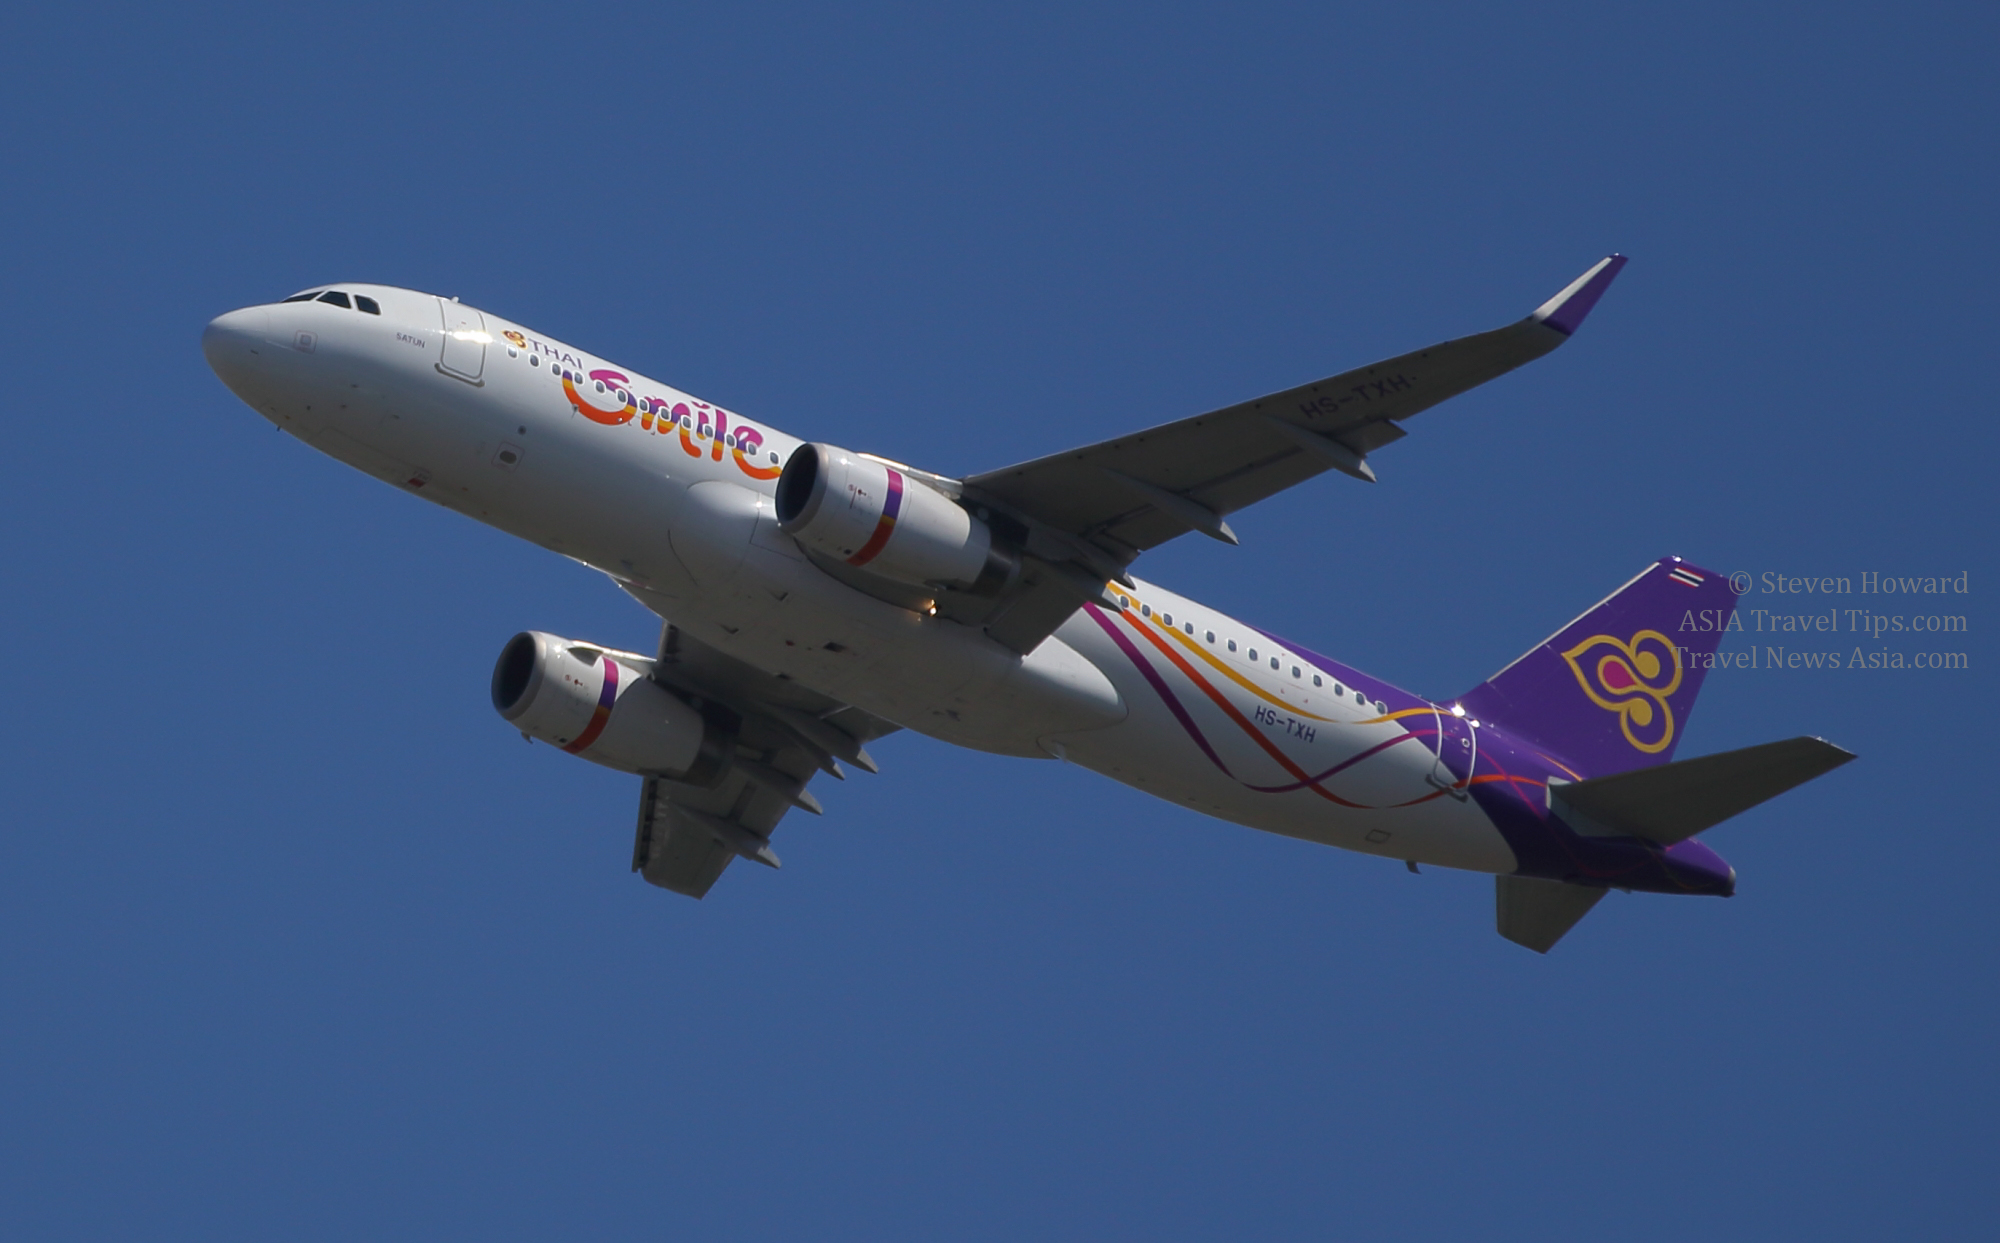 Thai Smile started operating daily Hong Kong flights to and from Bangkok and Phuket on 28 October 2018. Picture by Steven Howard of TravelNewsAsia.com Click to enlarge.